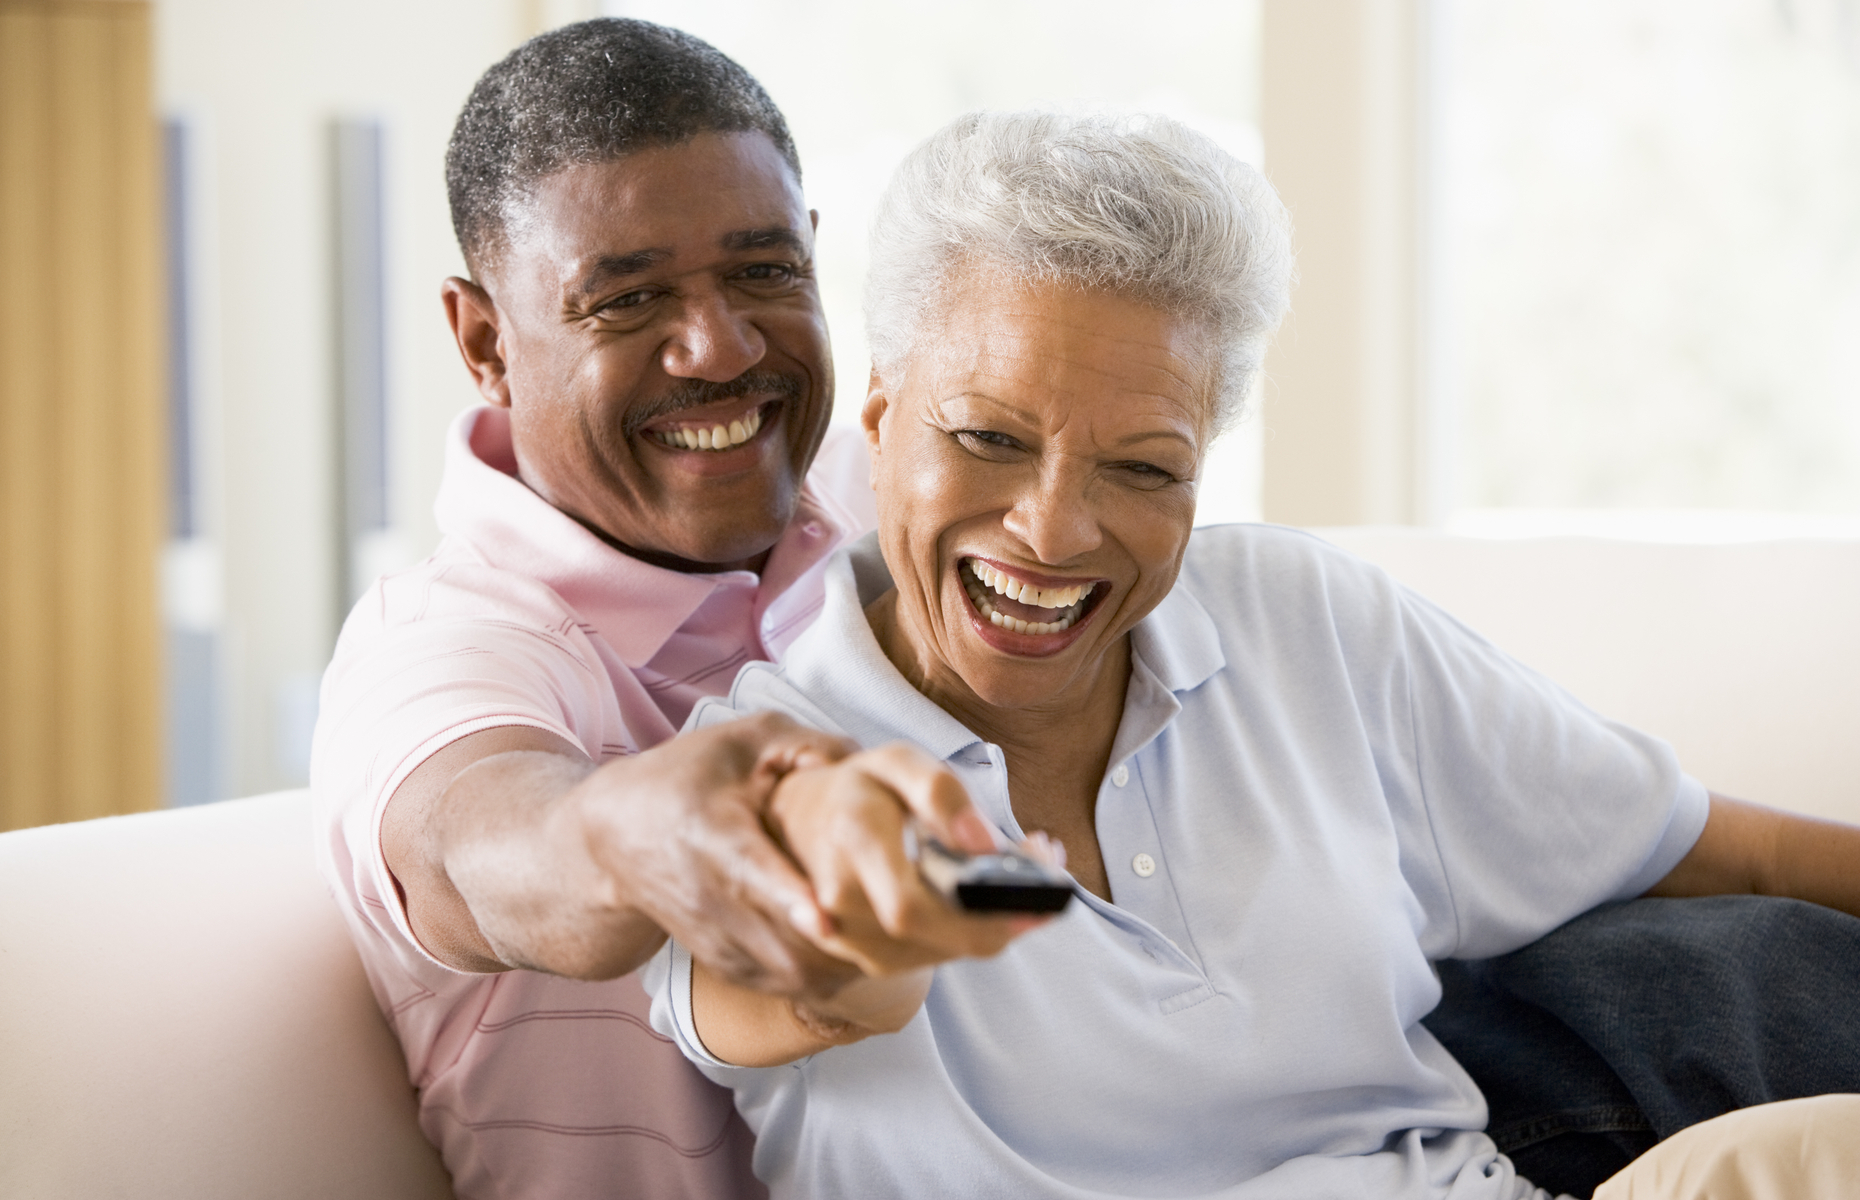 <p>While there is a growing trend to cut cable and watch streaming and other online content, baby boomers hold fast to their remote controls. A Gallup survey reveals that <a href="https://www.foxbusiness.com/features/where-baby-boomers-spend-their-money-and-how-to-profit-from-it" class="atom_link atom_valid" rel="noreferrer noopener">40% of the generation</a> raised on TV said they were spending more on cable and satellite television than younger people. And only 15% said they were going to make the switch to streaming services, giving some hope to old-school media companies.</p>